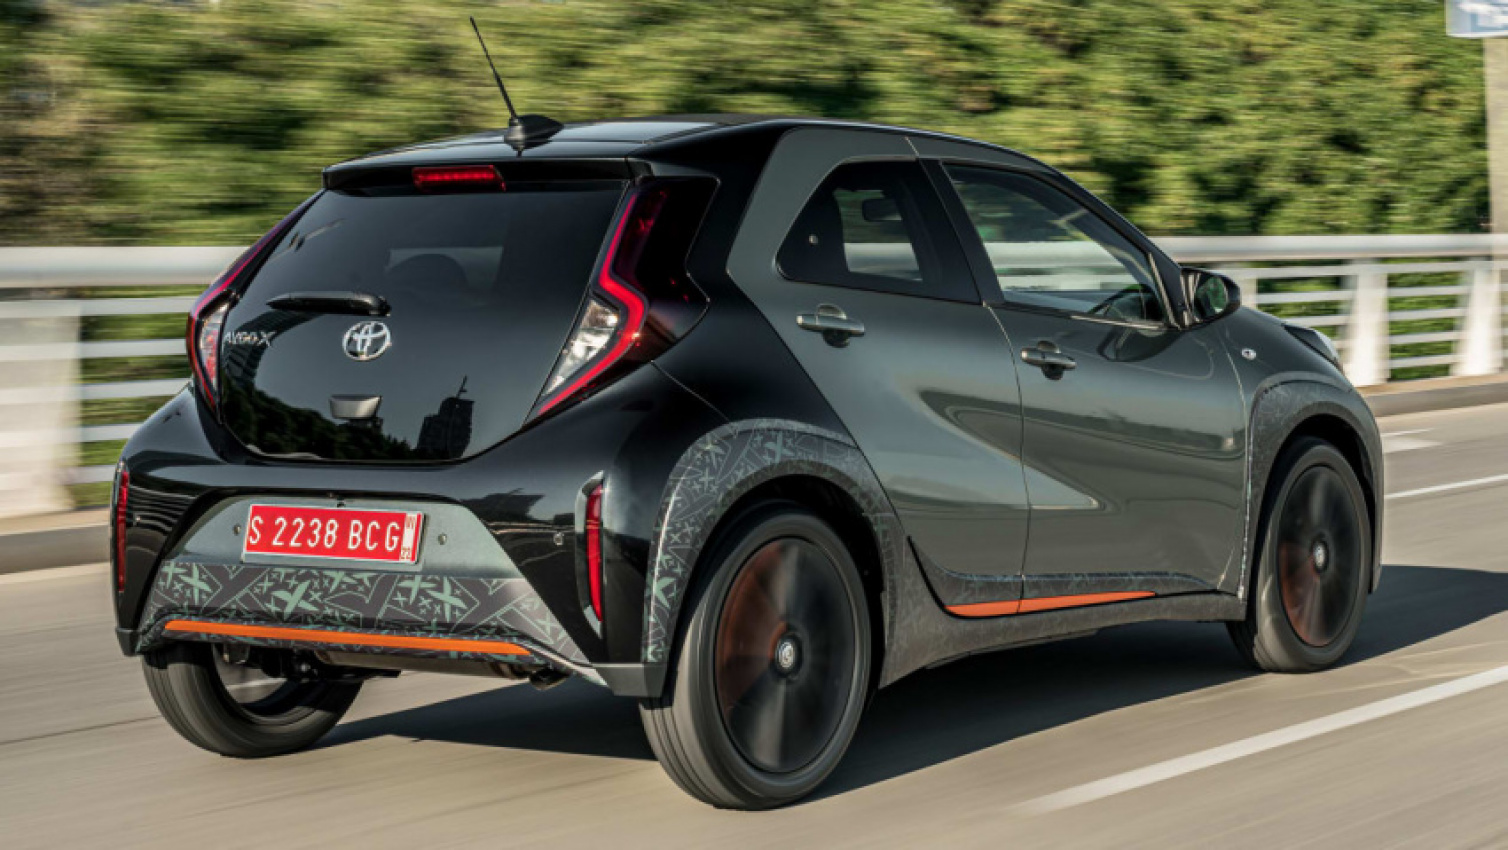 android, autos, cars, reviews, toyota, aygo x hatchback, city cars, android, toyota aygo x hatchback review